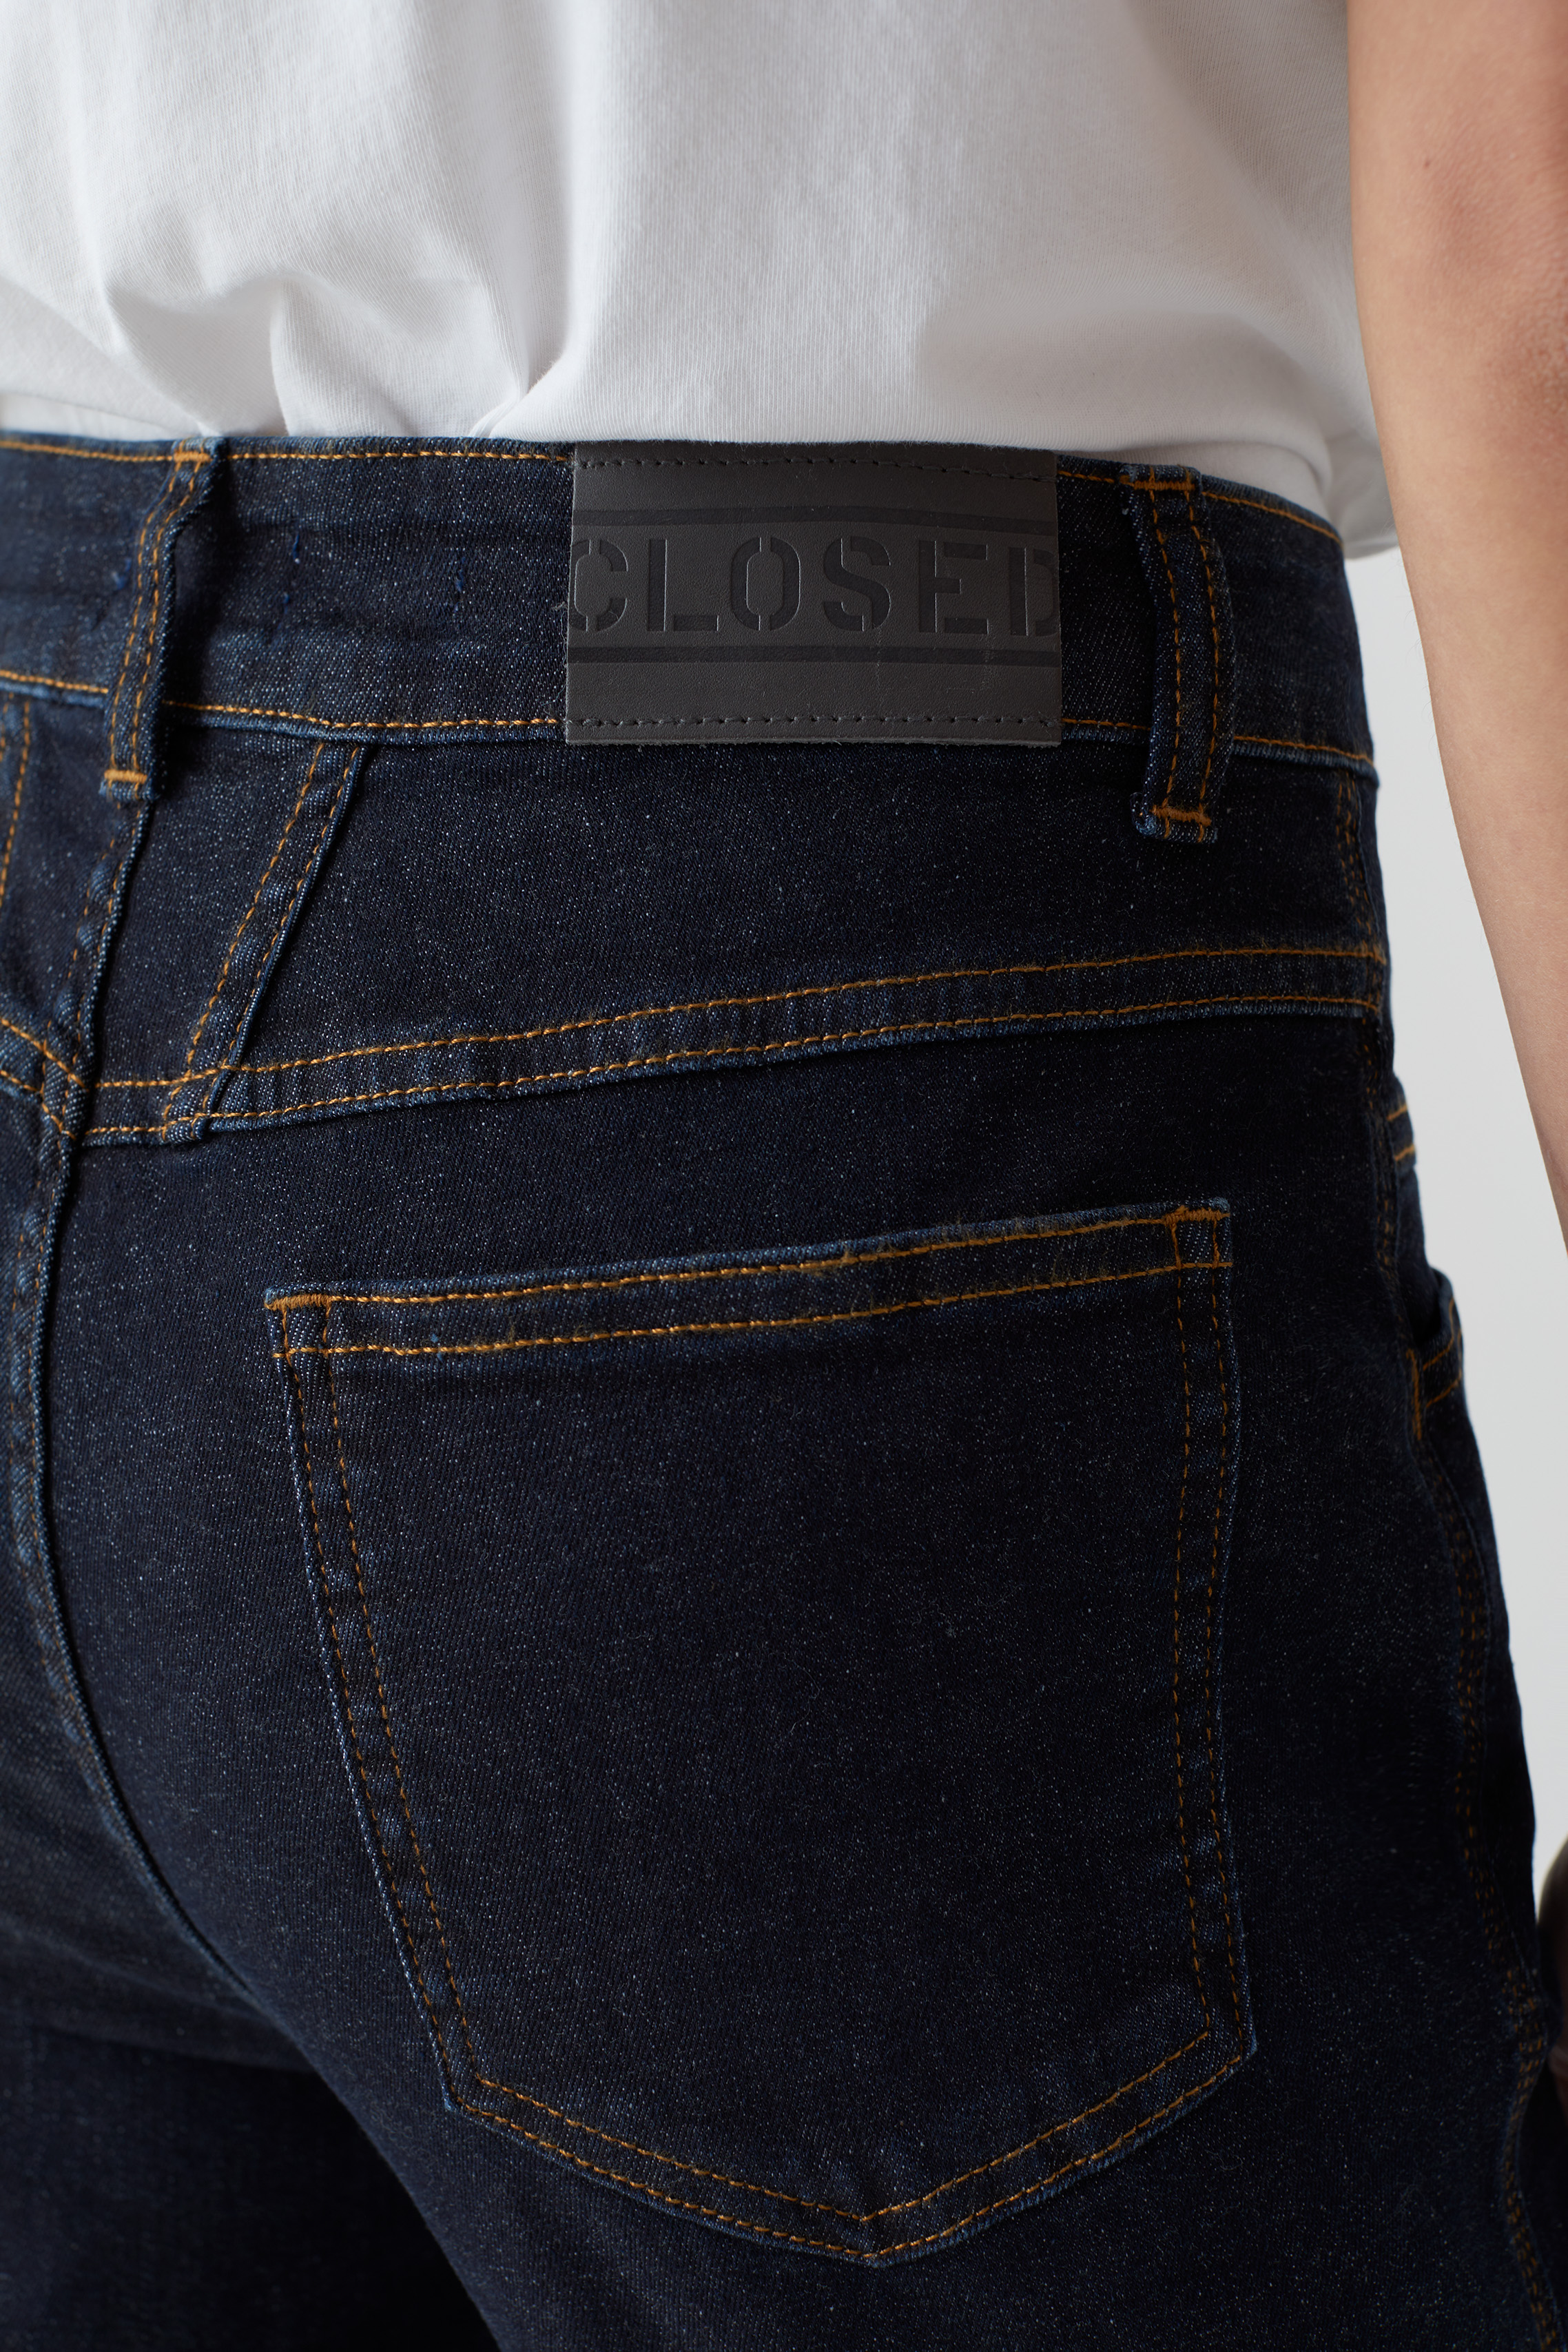 PEDAL PUSHER JEANS